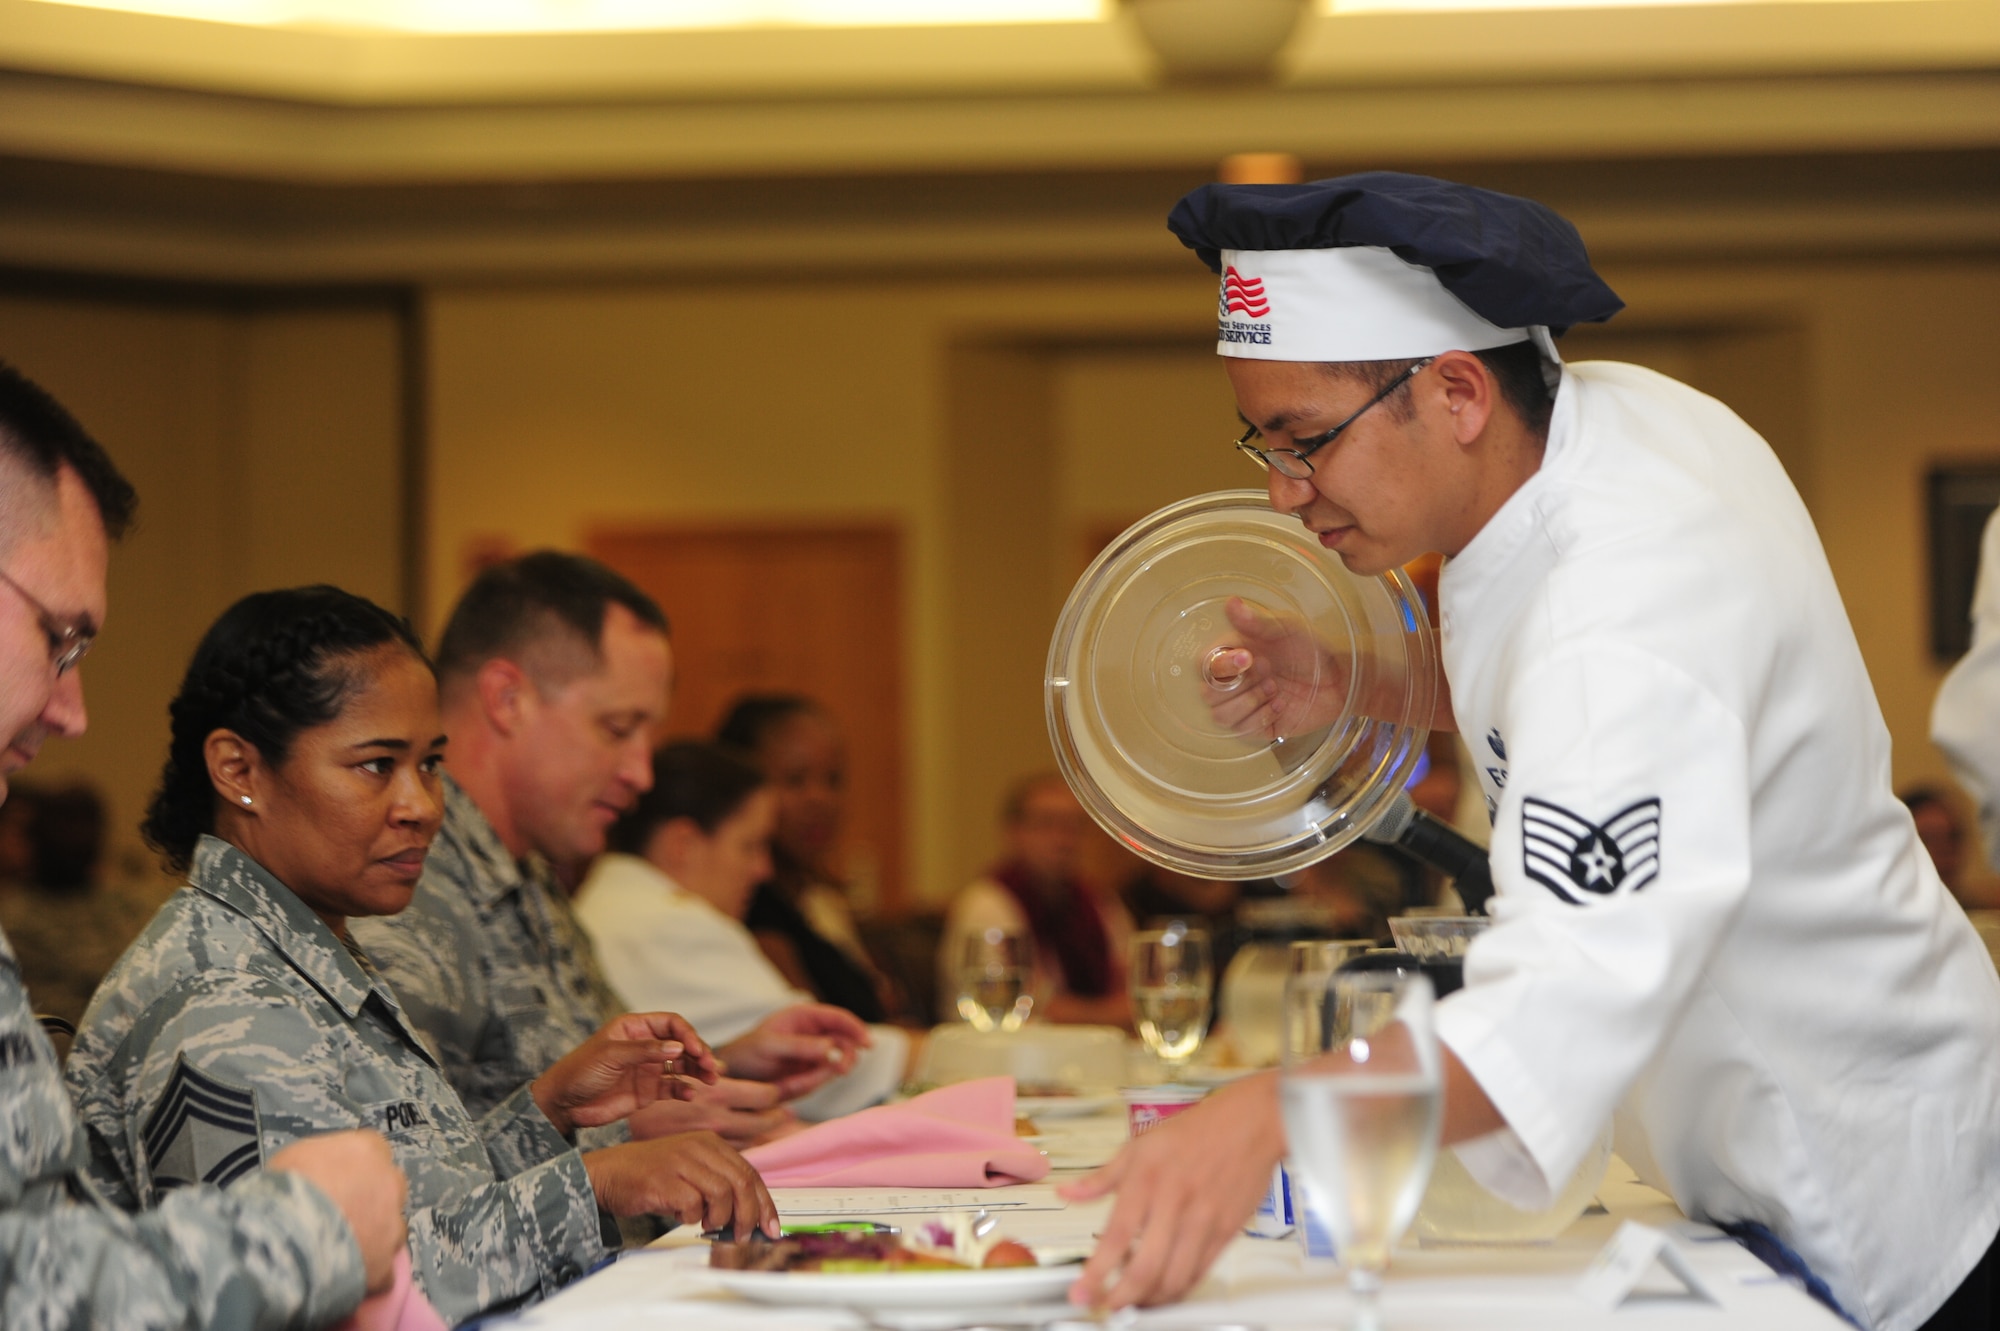 U.S. Air Force Staff Sgt. Renton Espejo, a shift manager for the 509th Force Support Squadron, presents the blue team’s main dish to the judges at the Global Strike Iron Chef Challenge at Whiteman Air Force Base, Mo., Sept. 4, 2015. The red team won the competition and will compete at the major command level at Barksdale AFB, La.
(U.S. Air Force photo by Airman 1st Class Jovan Banks/Released)
